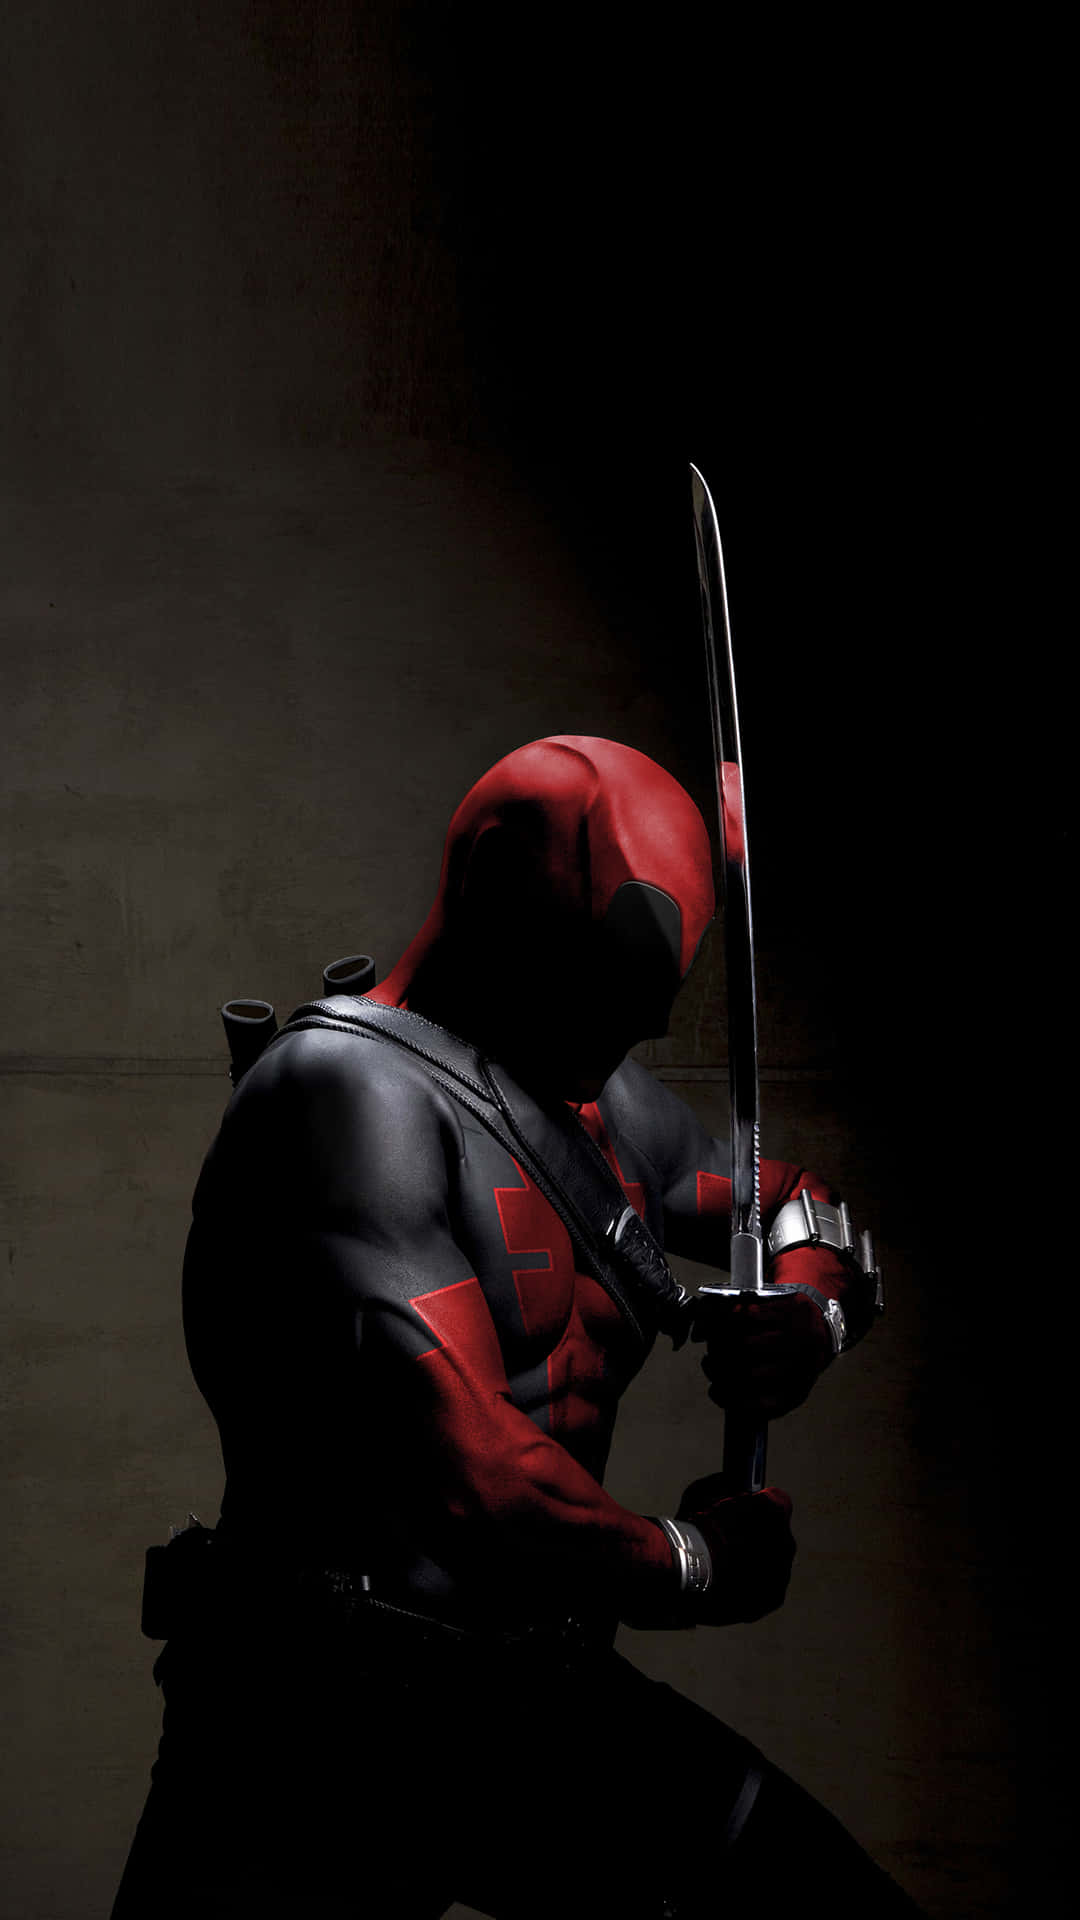 The Merc with a Mouth, Deadpool, in his signature black and red costume. Wallpaper